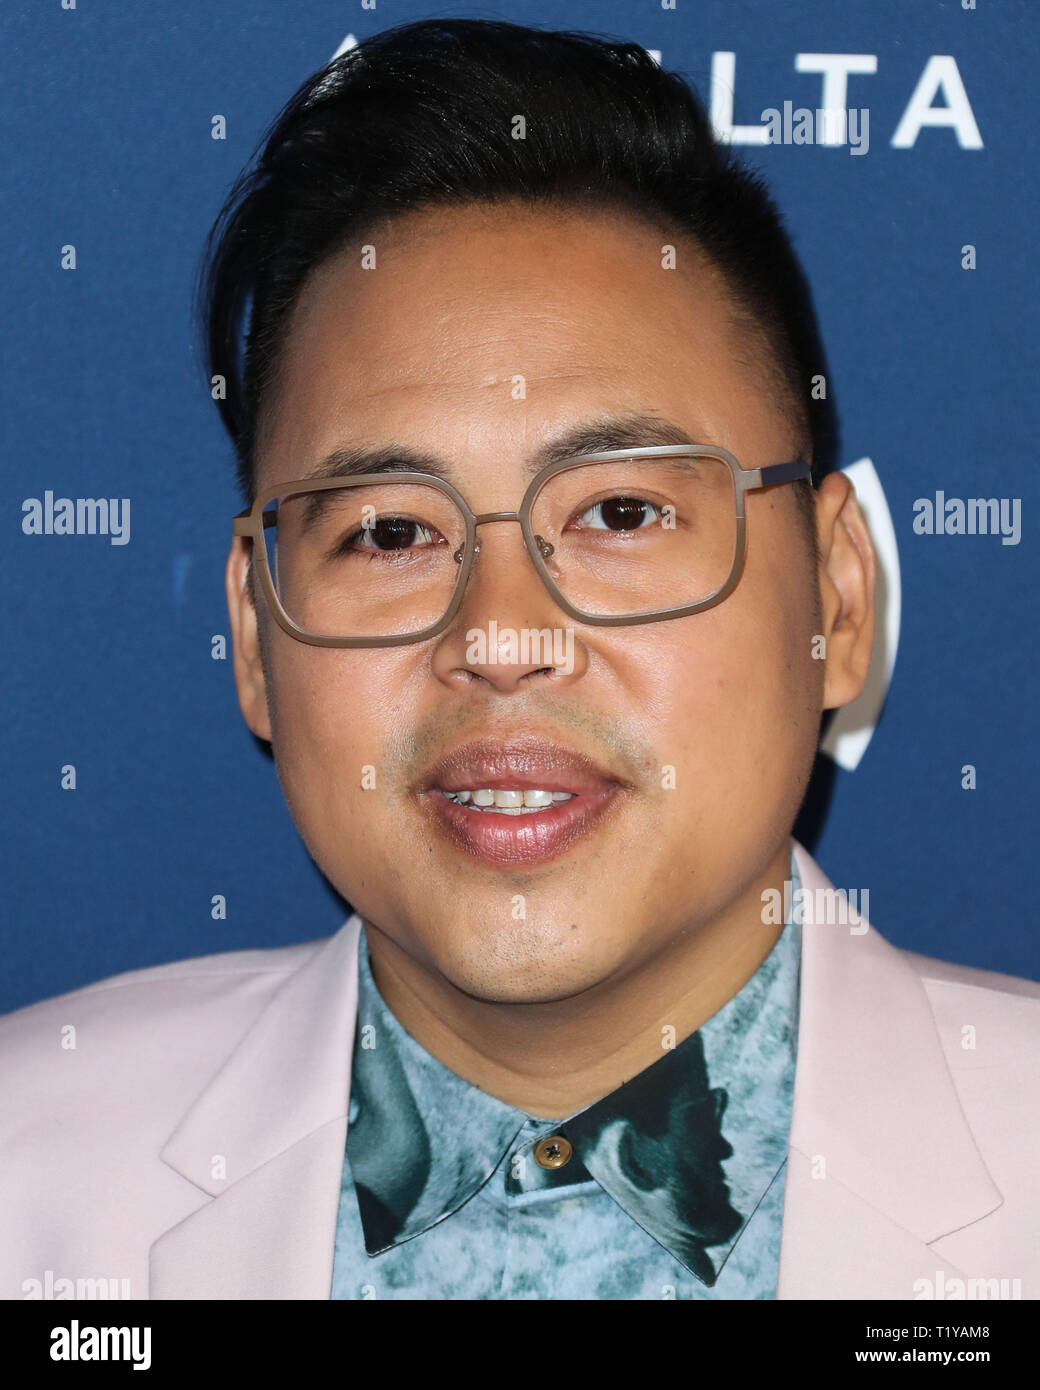 BEVERLY HILLS, LOS ANGELES, CALIFORNIA, USA - MARCH 28: Nico Santos arrives at the 30th Annual GLAAD Media Awards held at The Beverly Hilton Hotel on March 28, 2019 in Beverly Hills, Los Angeles, California, United States. (Photo by Xavier Collin/Image Press Agency) Stock Photo